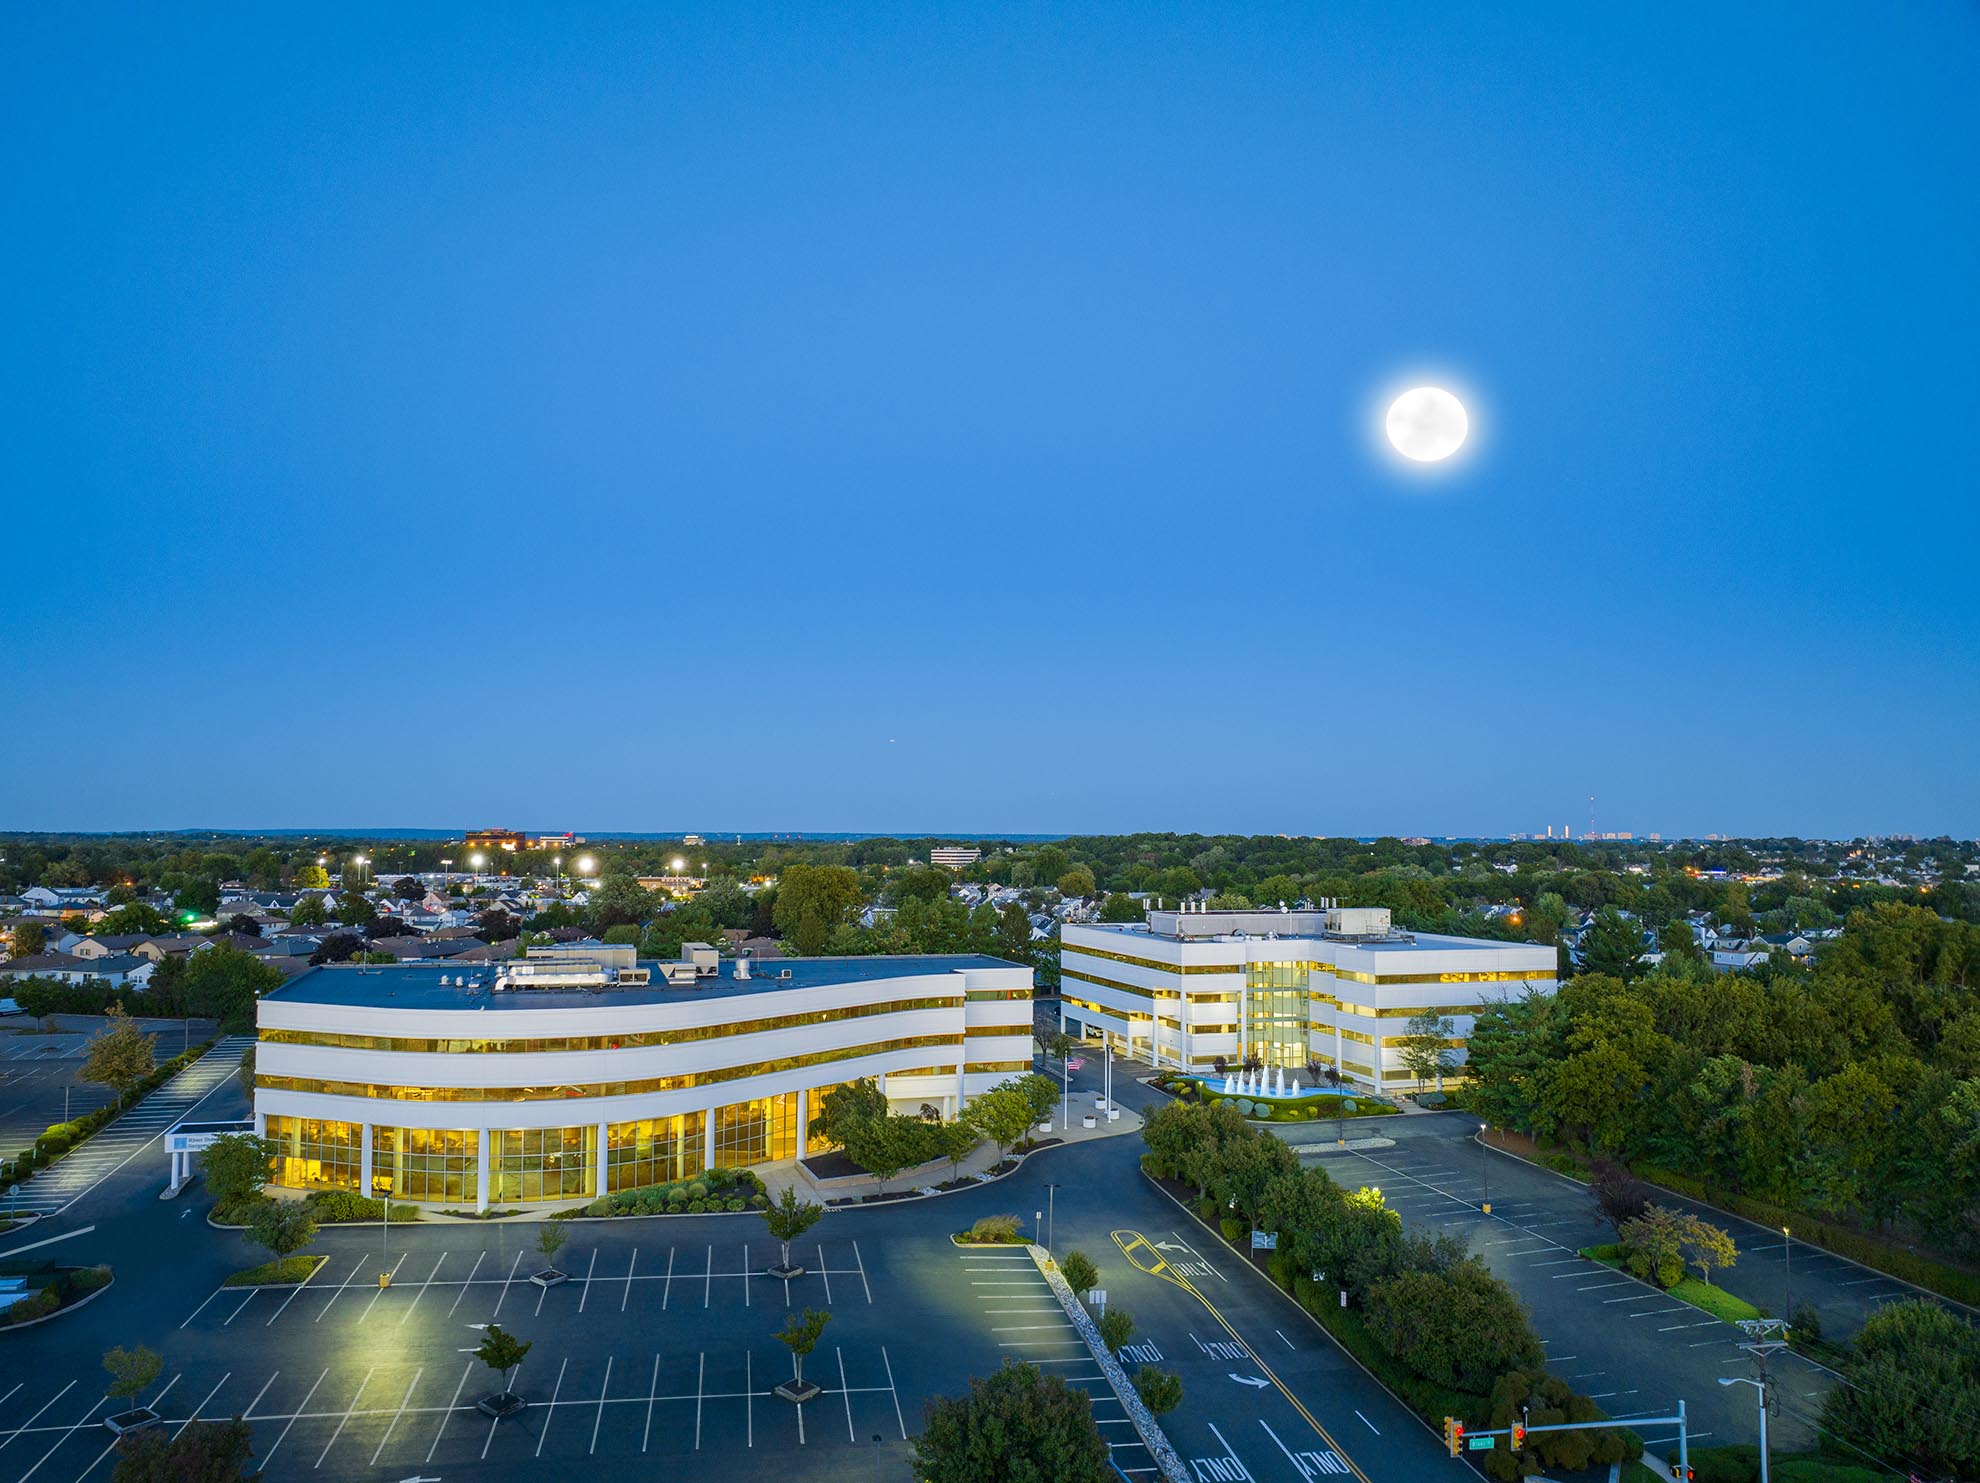 Drone Photograph of Elmwood Park New Jersey Commercial Building at Dusk